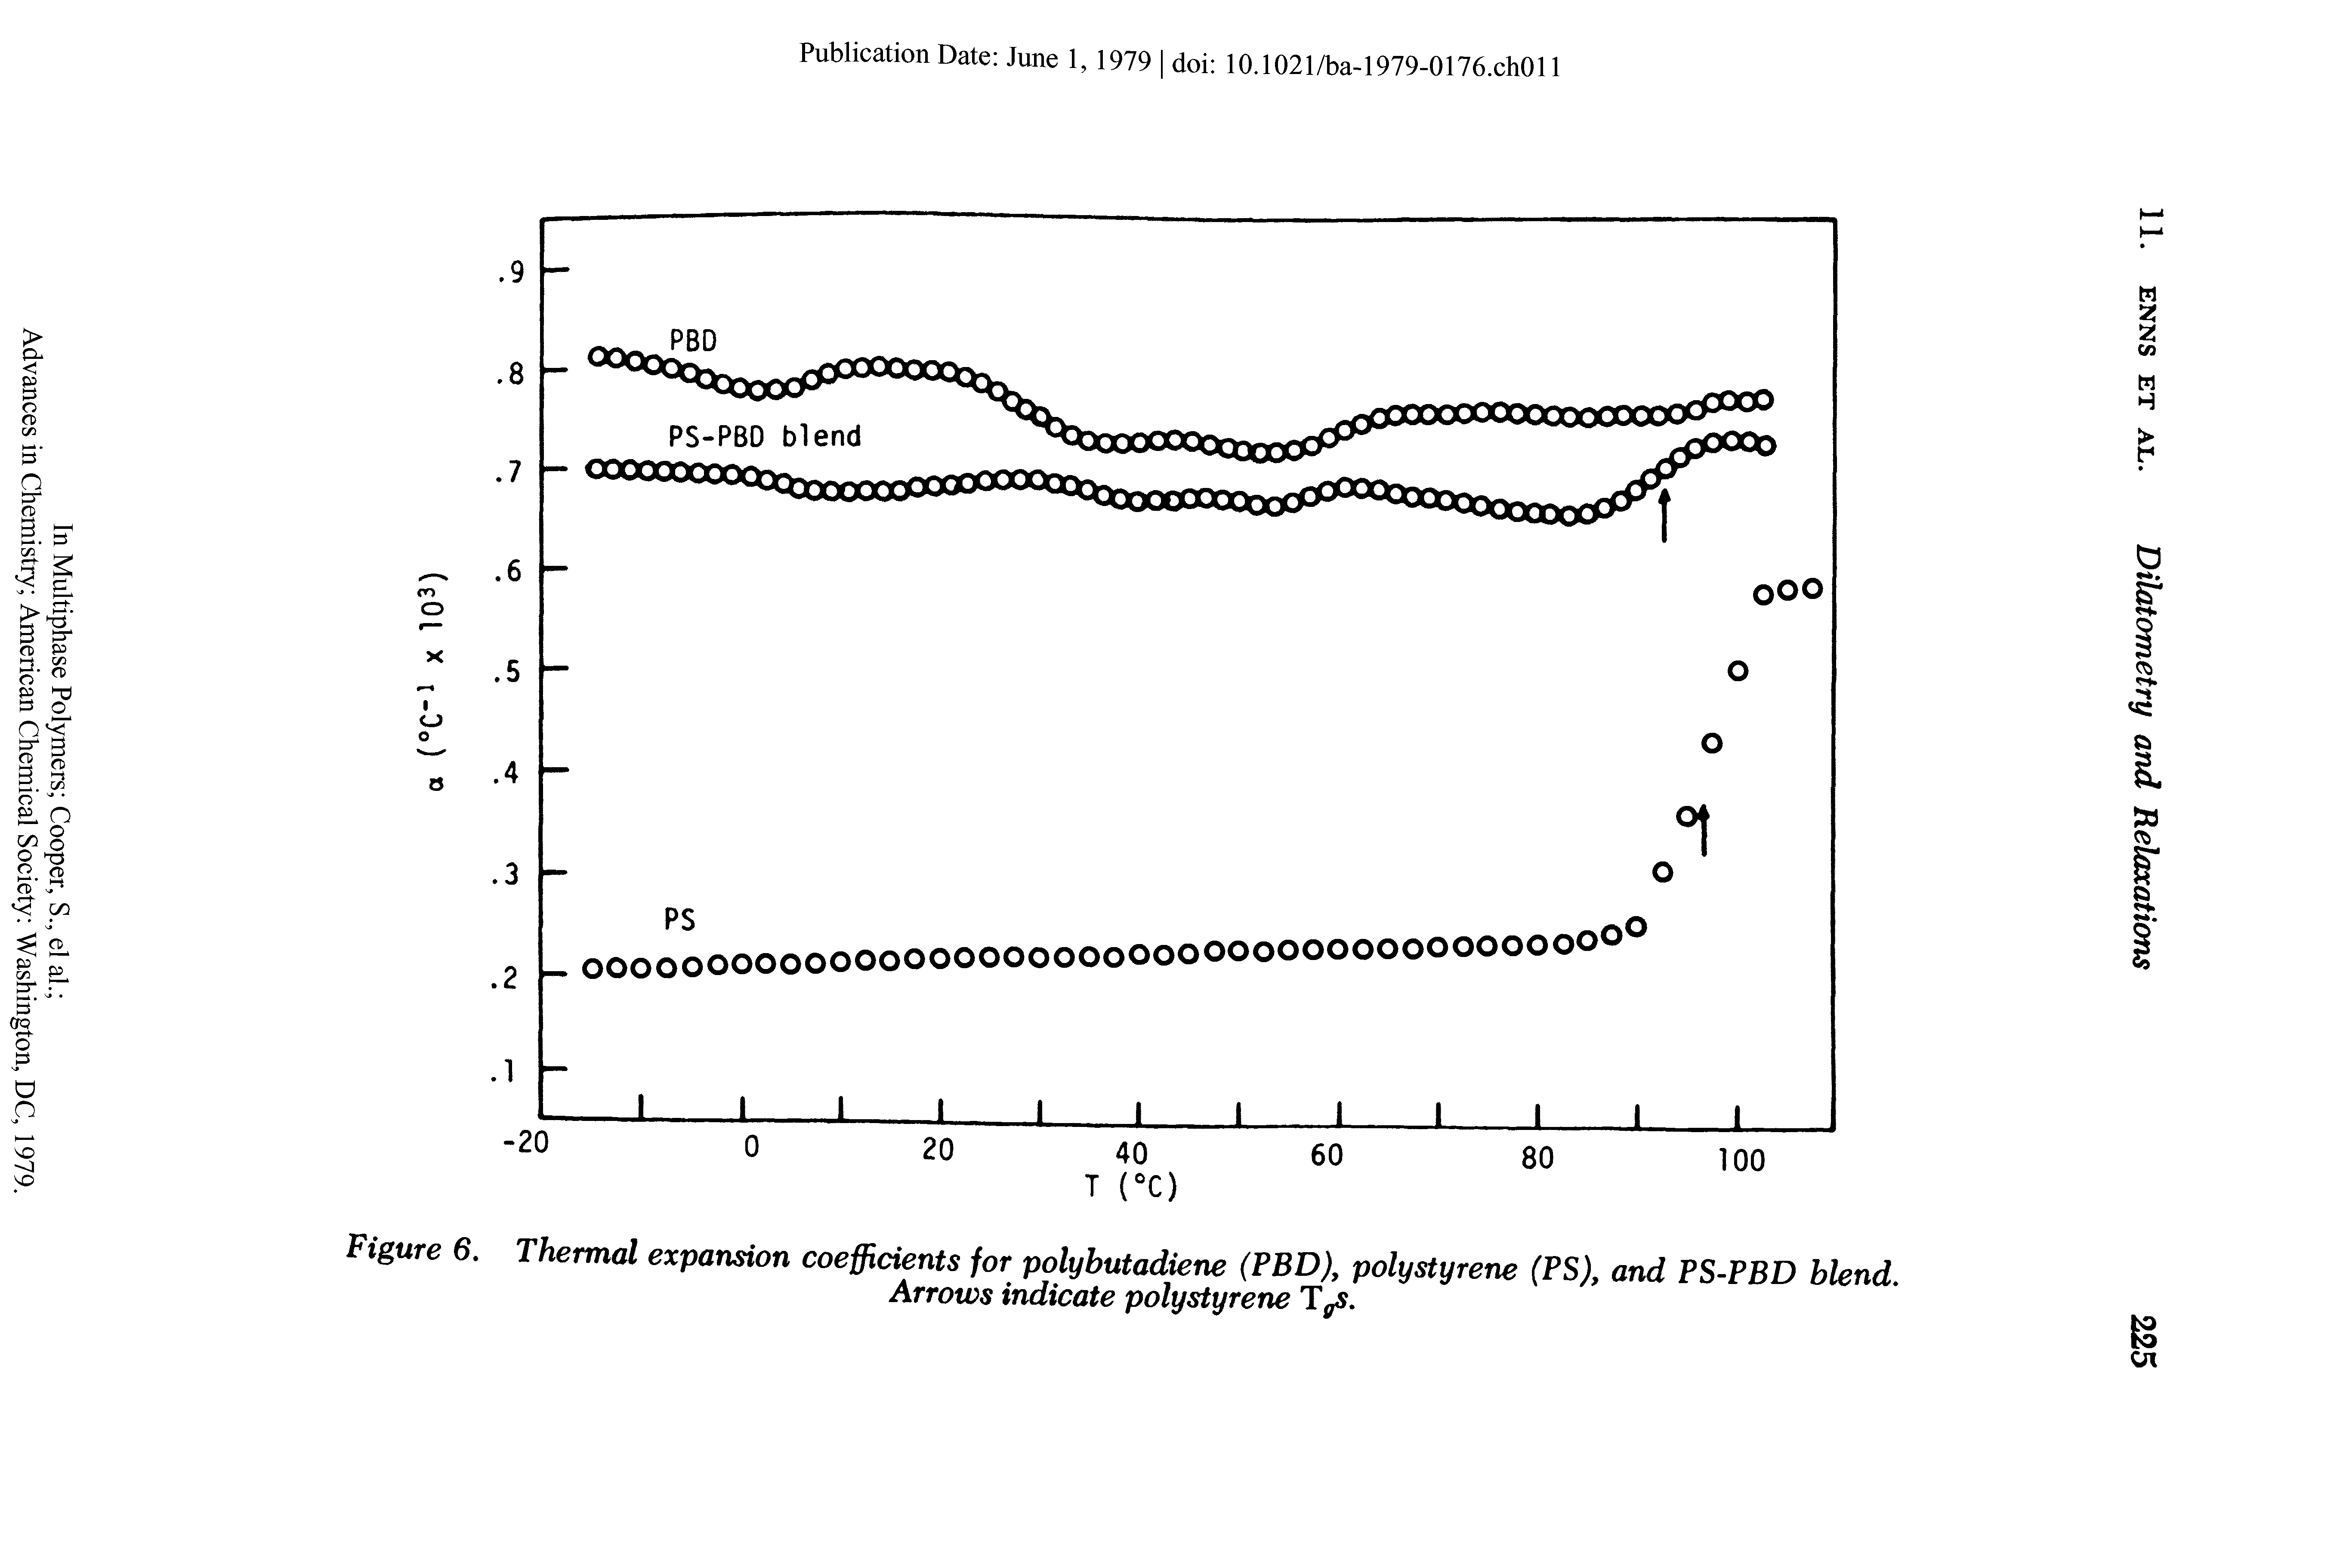 Figure 6. Thermal expansion coefficients for polybutadiene (PBD), polystyrene (PS), and PS-PBD blend.